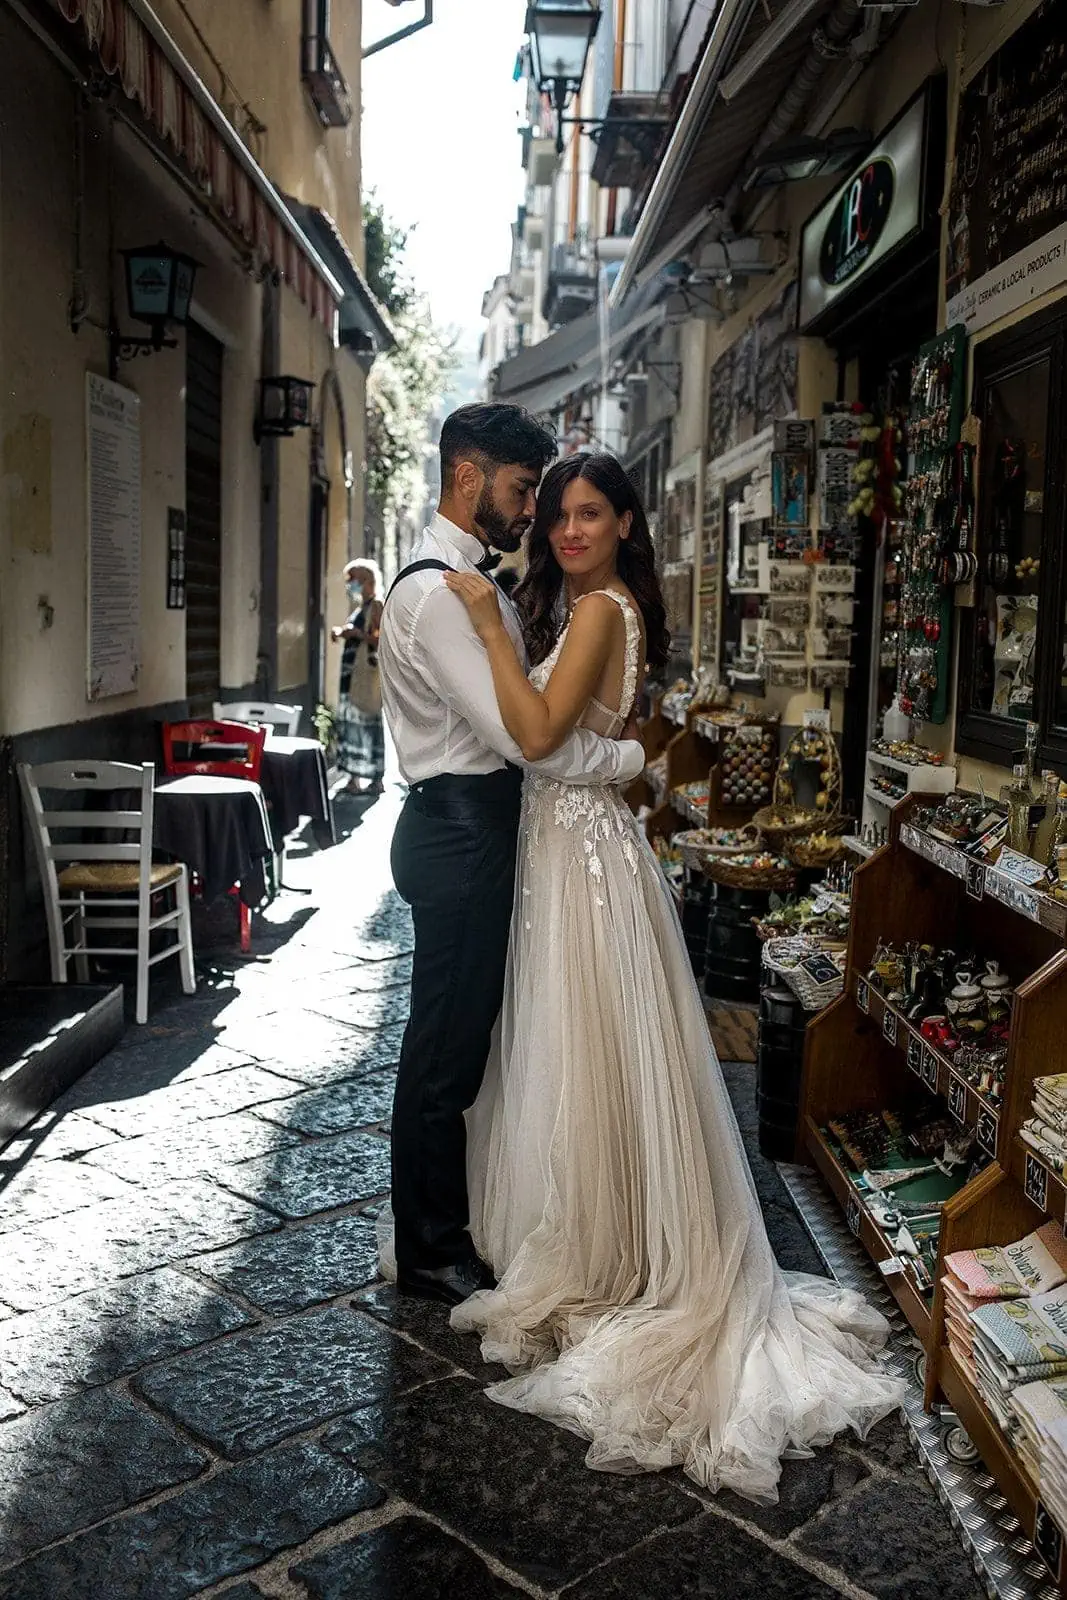 Bride and groom embrace in streets of Sorrento, Italy after elopement